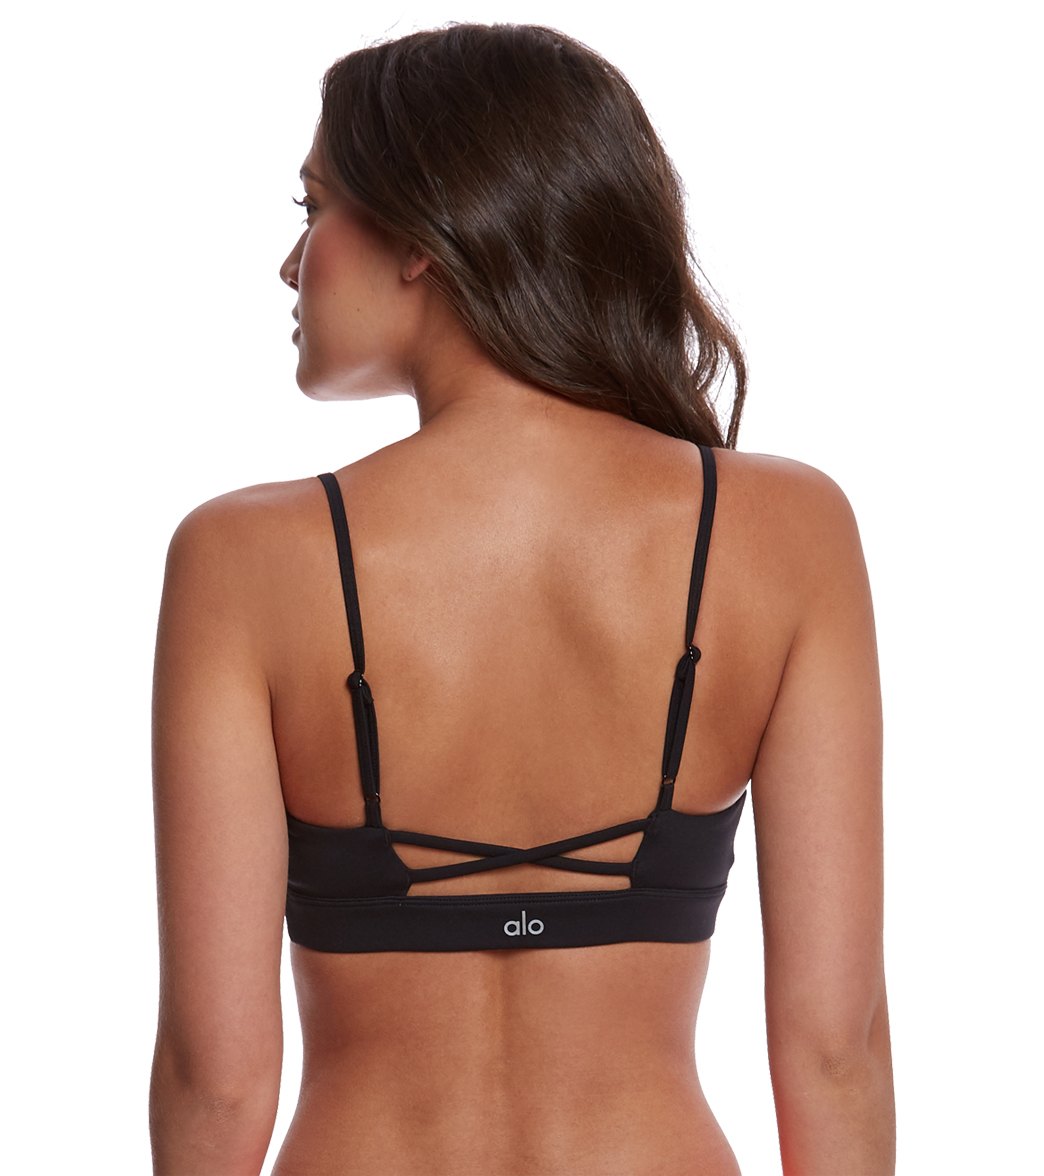 Genuine ALO YOGA Interlace bra in rich navy size S in excellent condition, in Maidstone, Kent